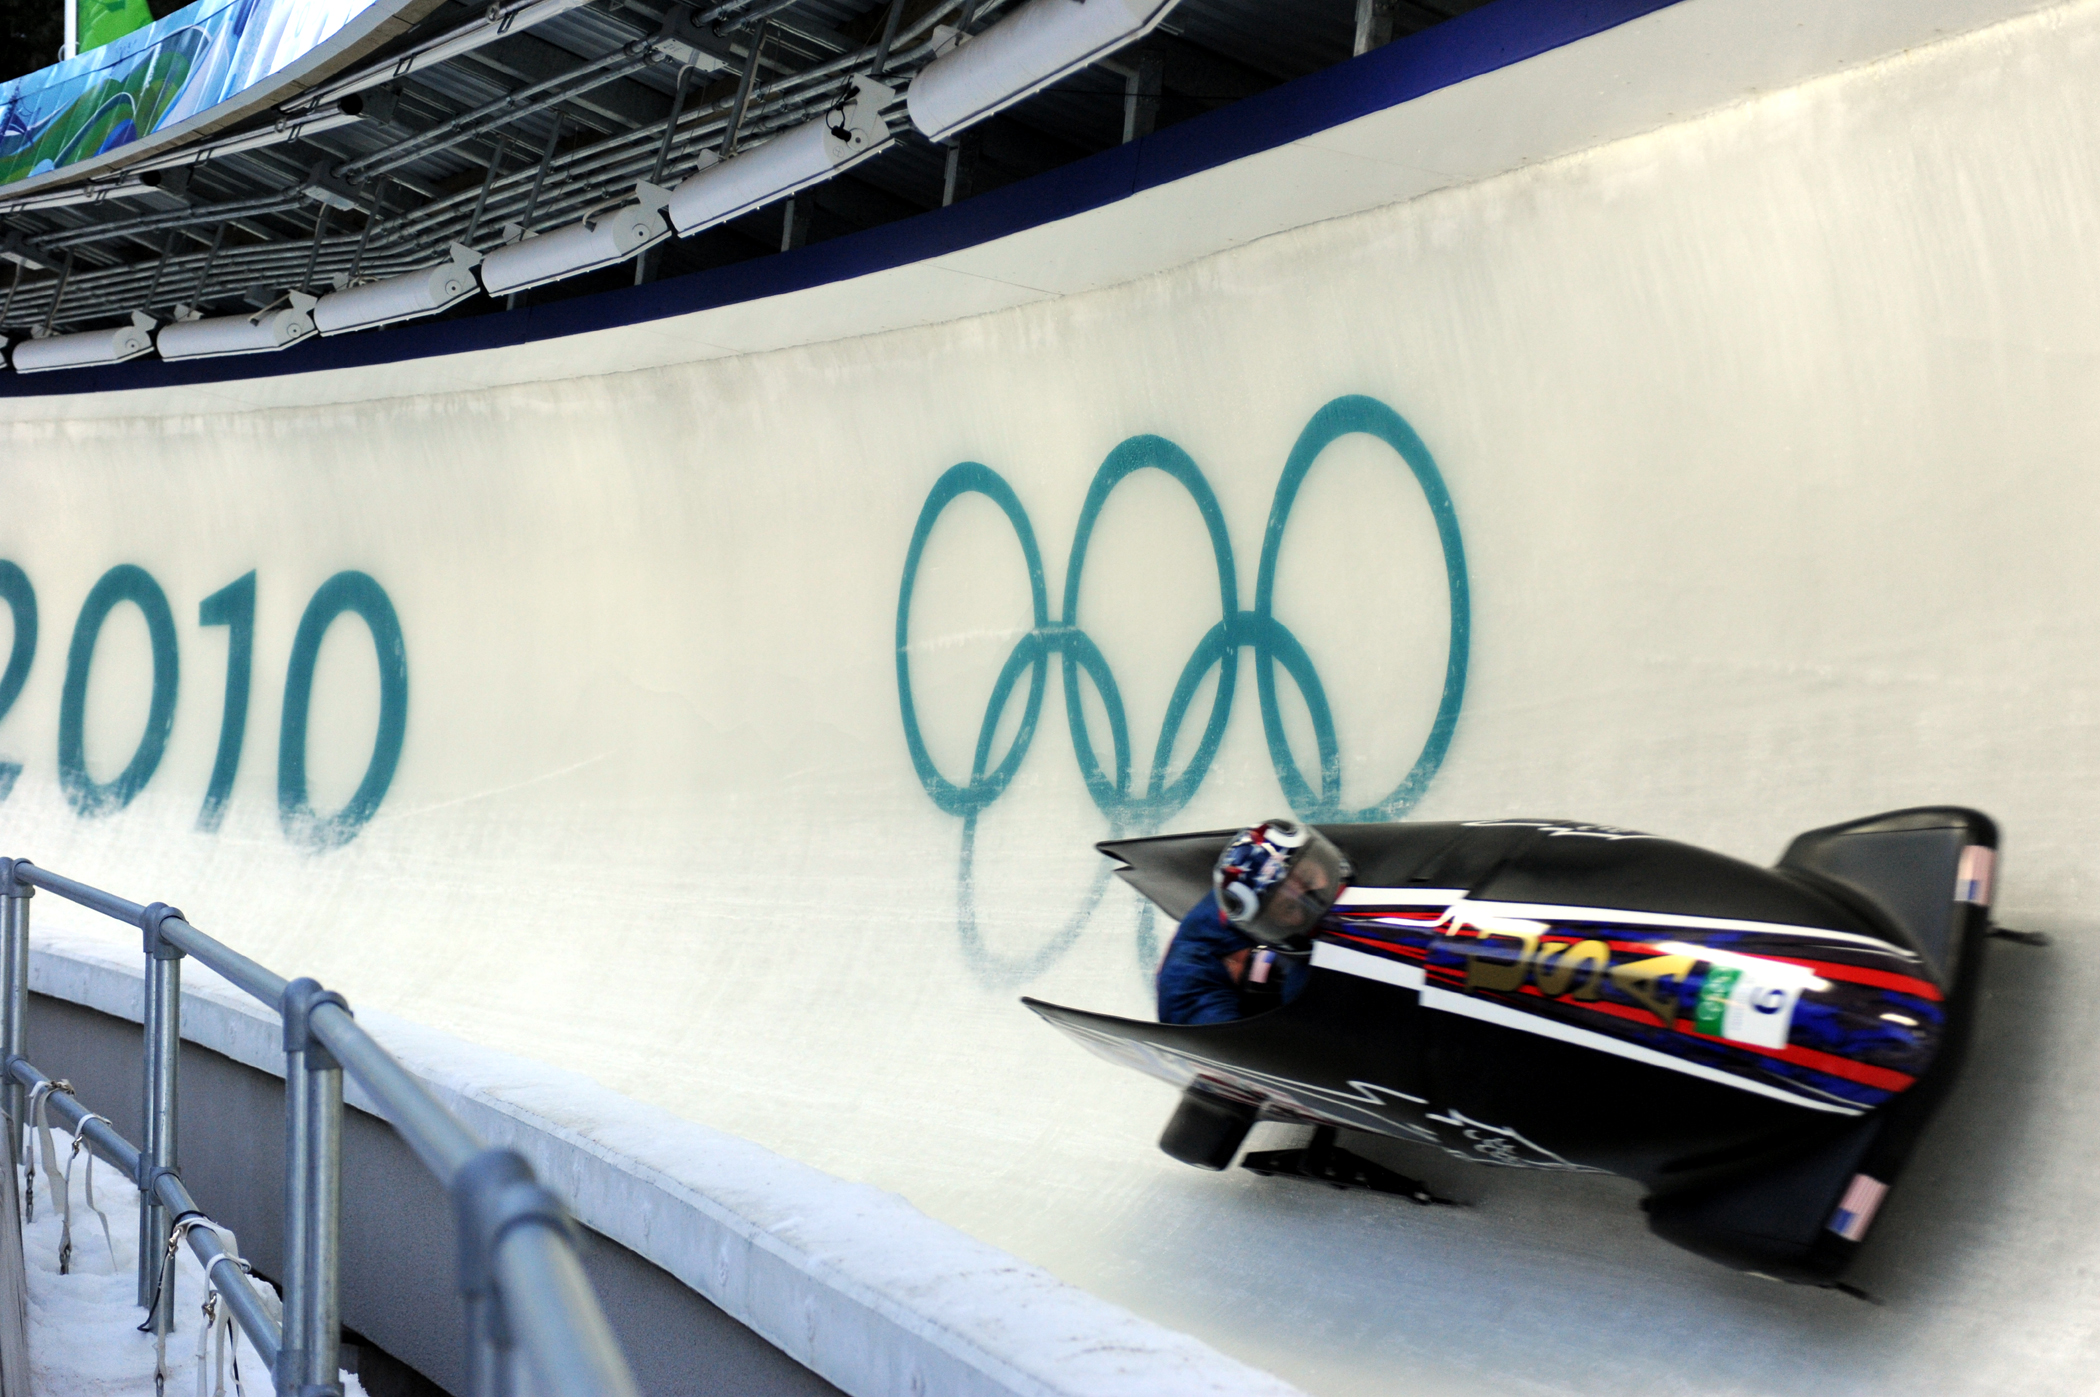 http://upload.wikimedia.org/wikipedia/commons/6/64/USA_I_in_heat_1_of_2_man_bobsleigh_at_2010_Winter_Olympics_2010-02-20.jpg